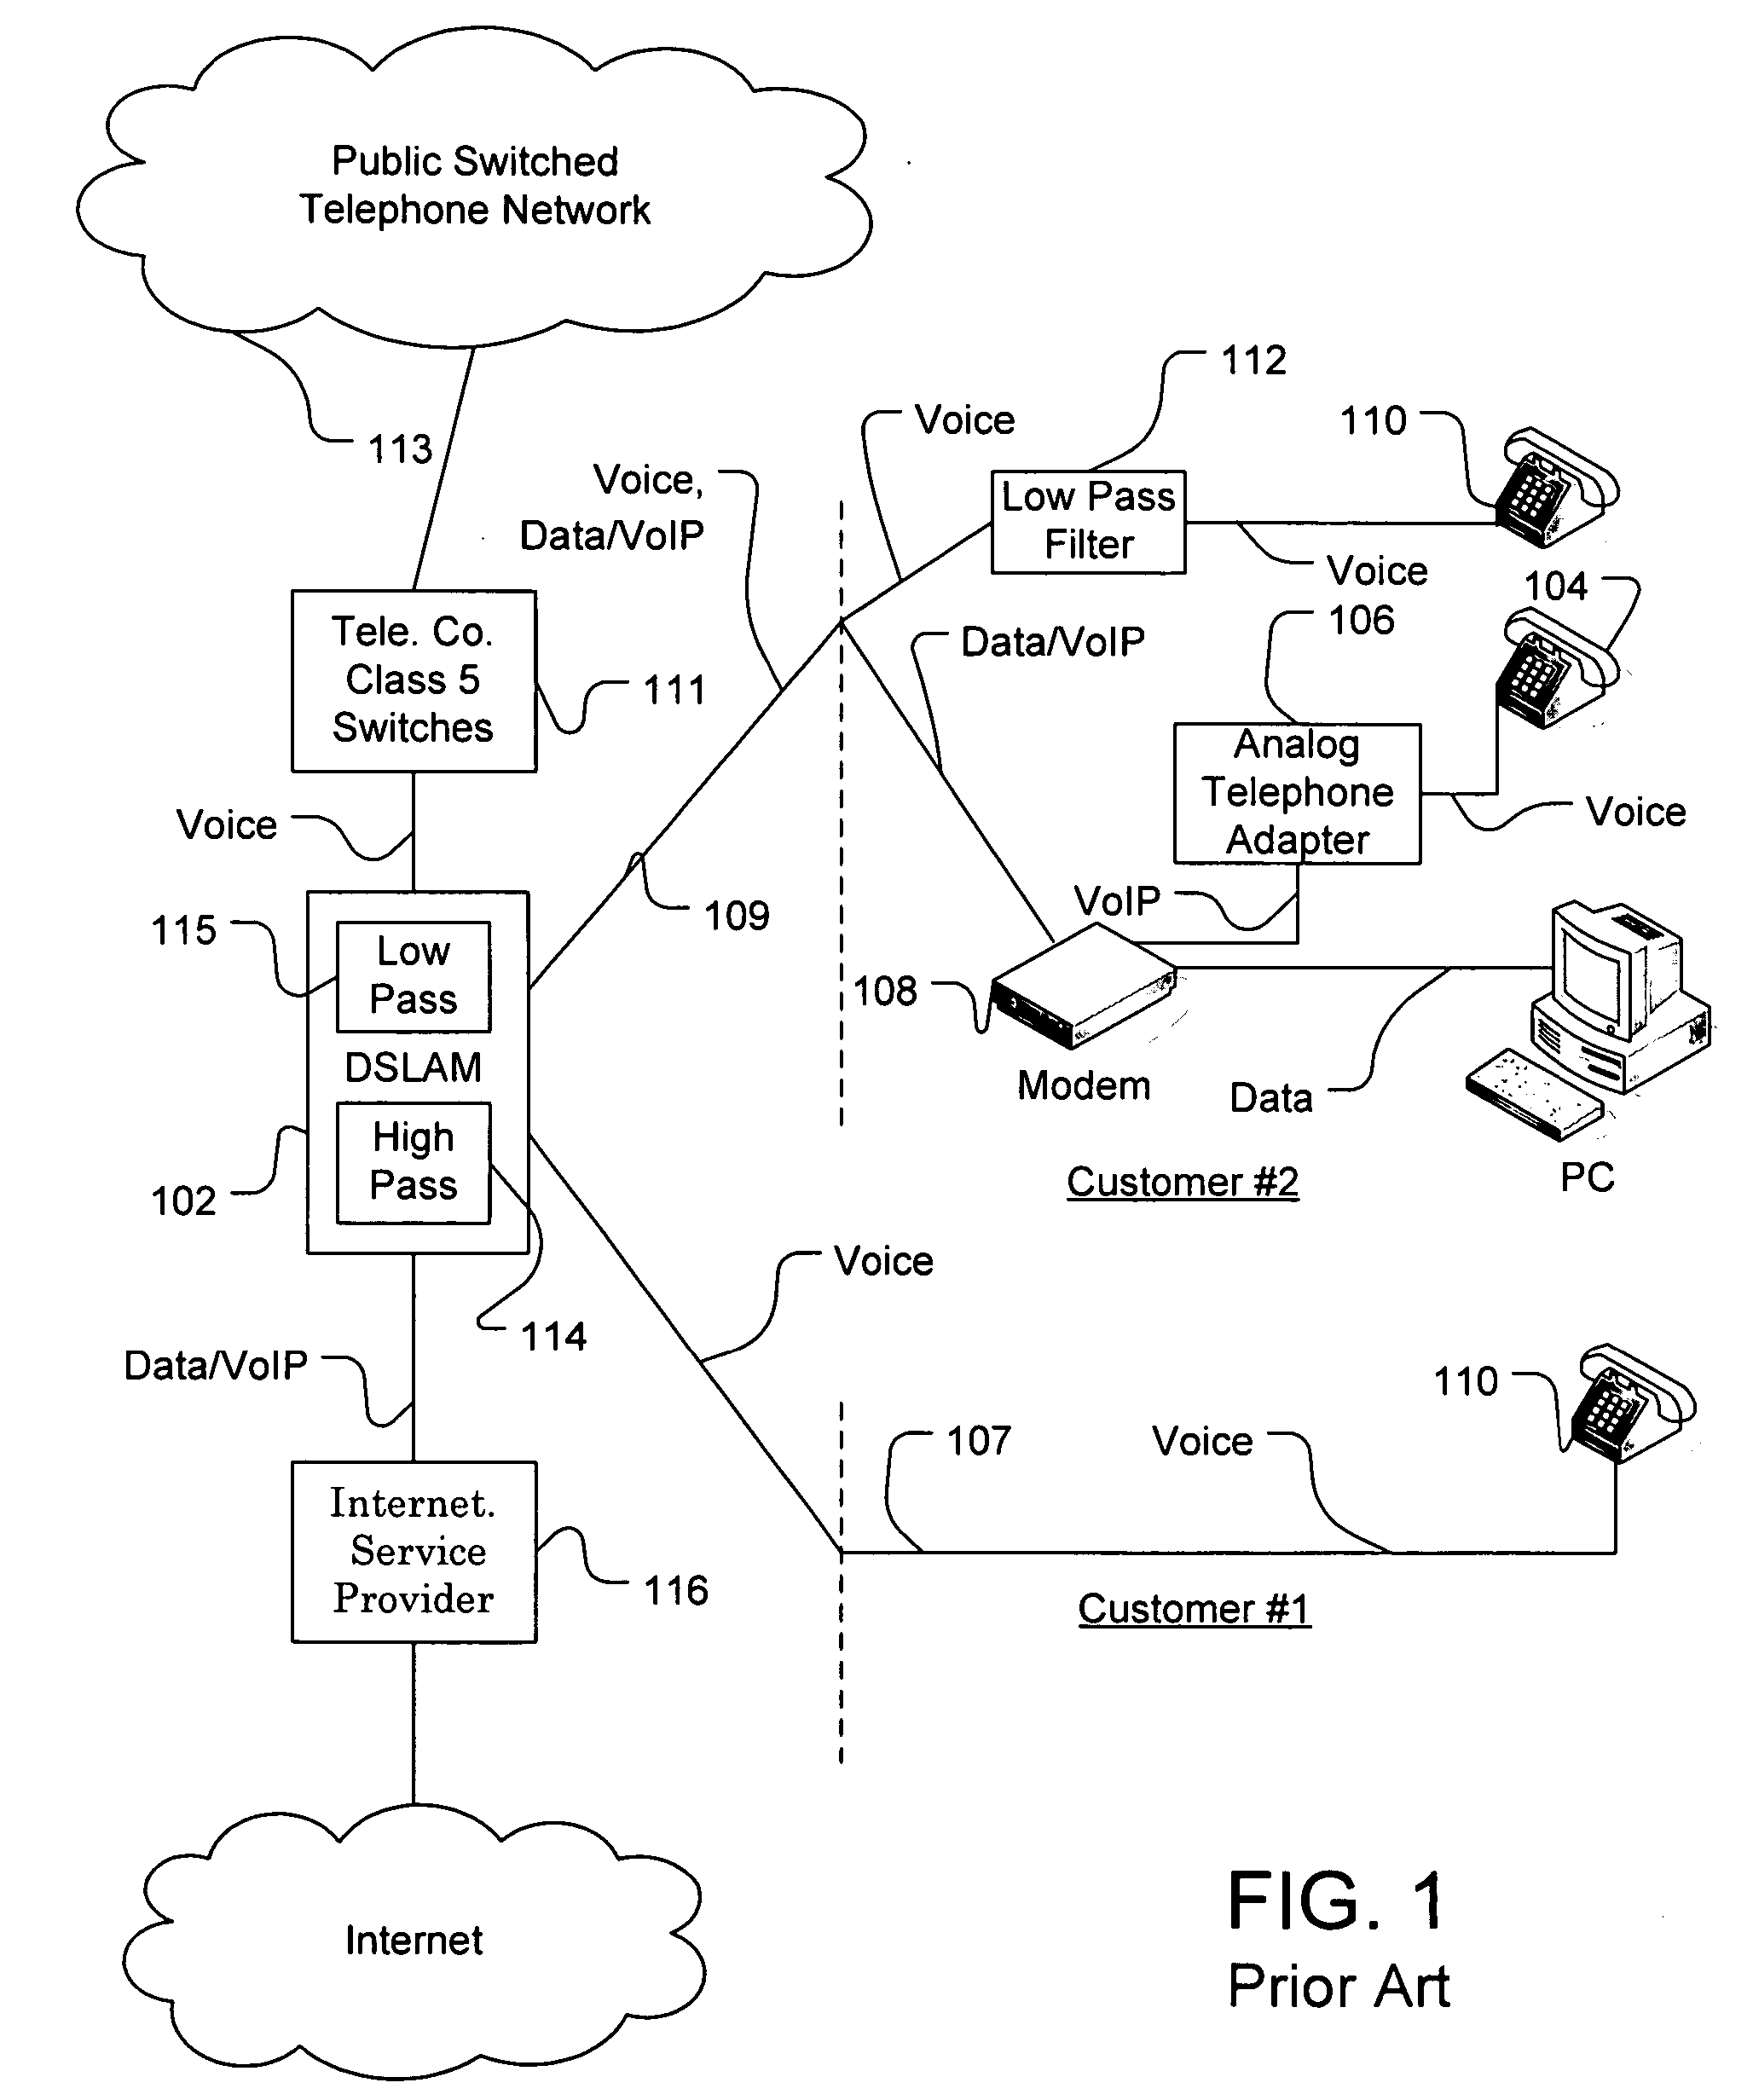 Telephone network architecture for a voice over internet protocol service